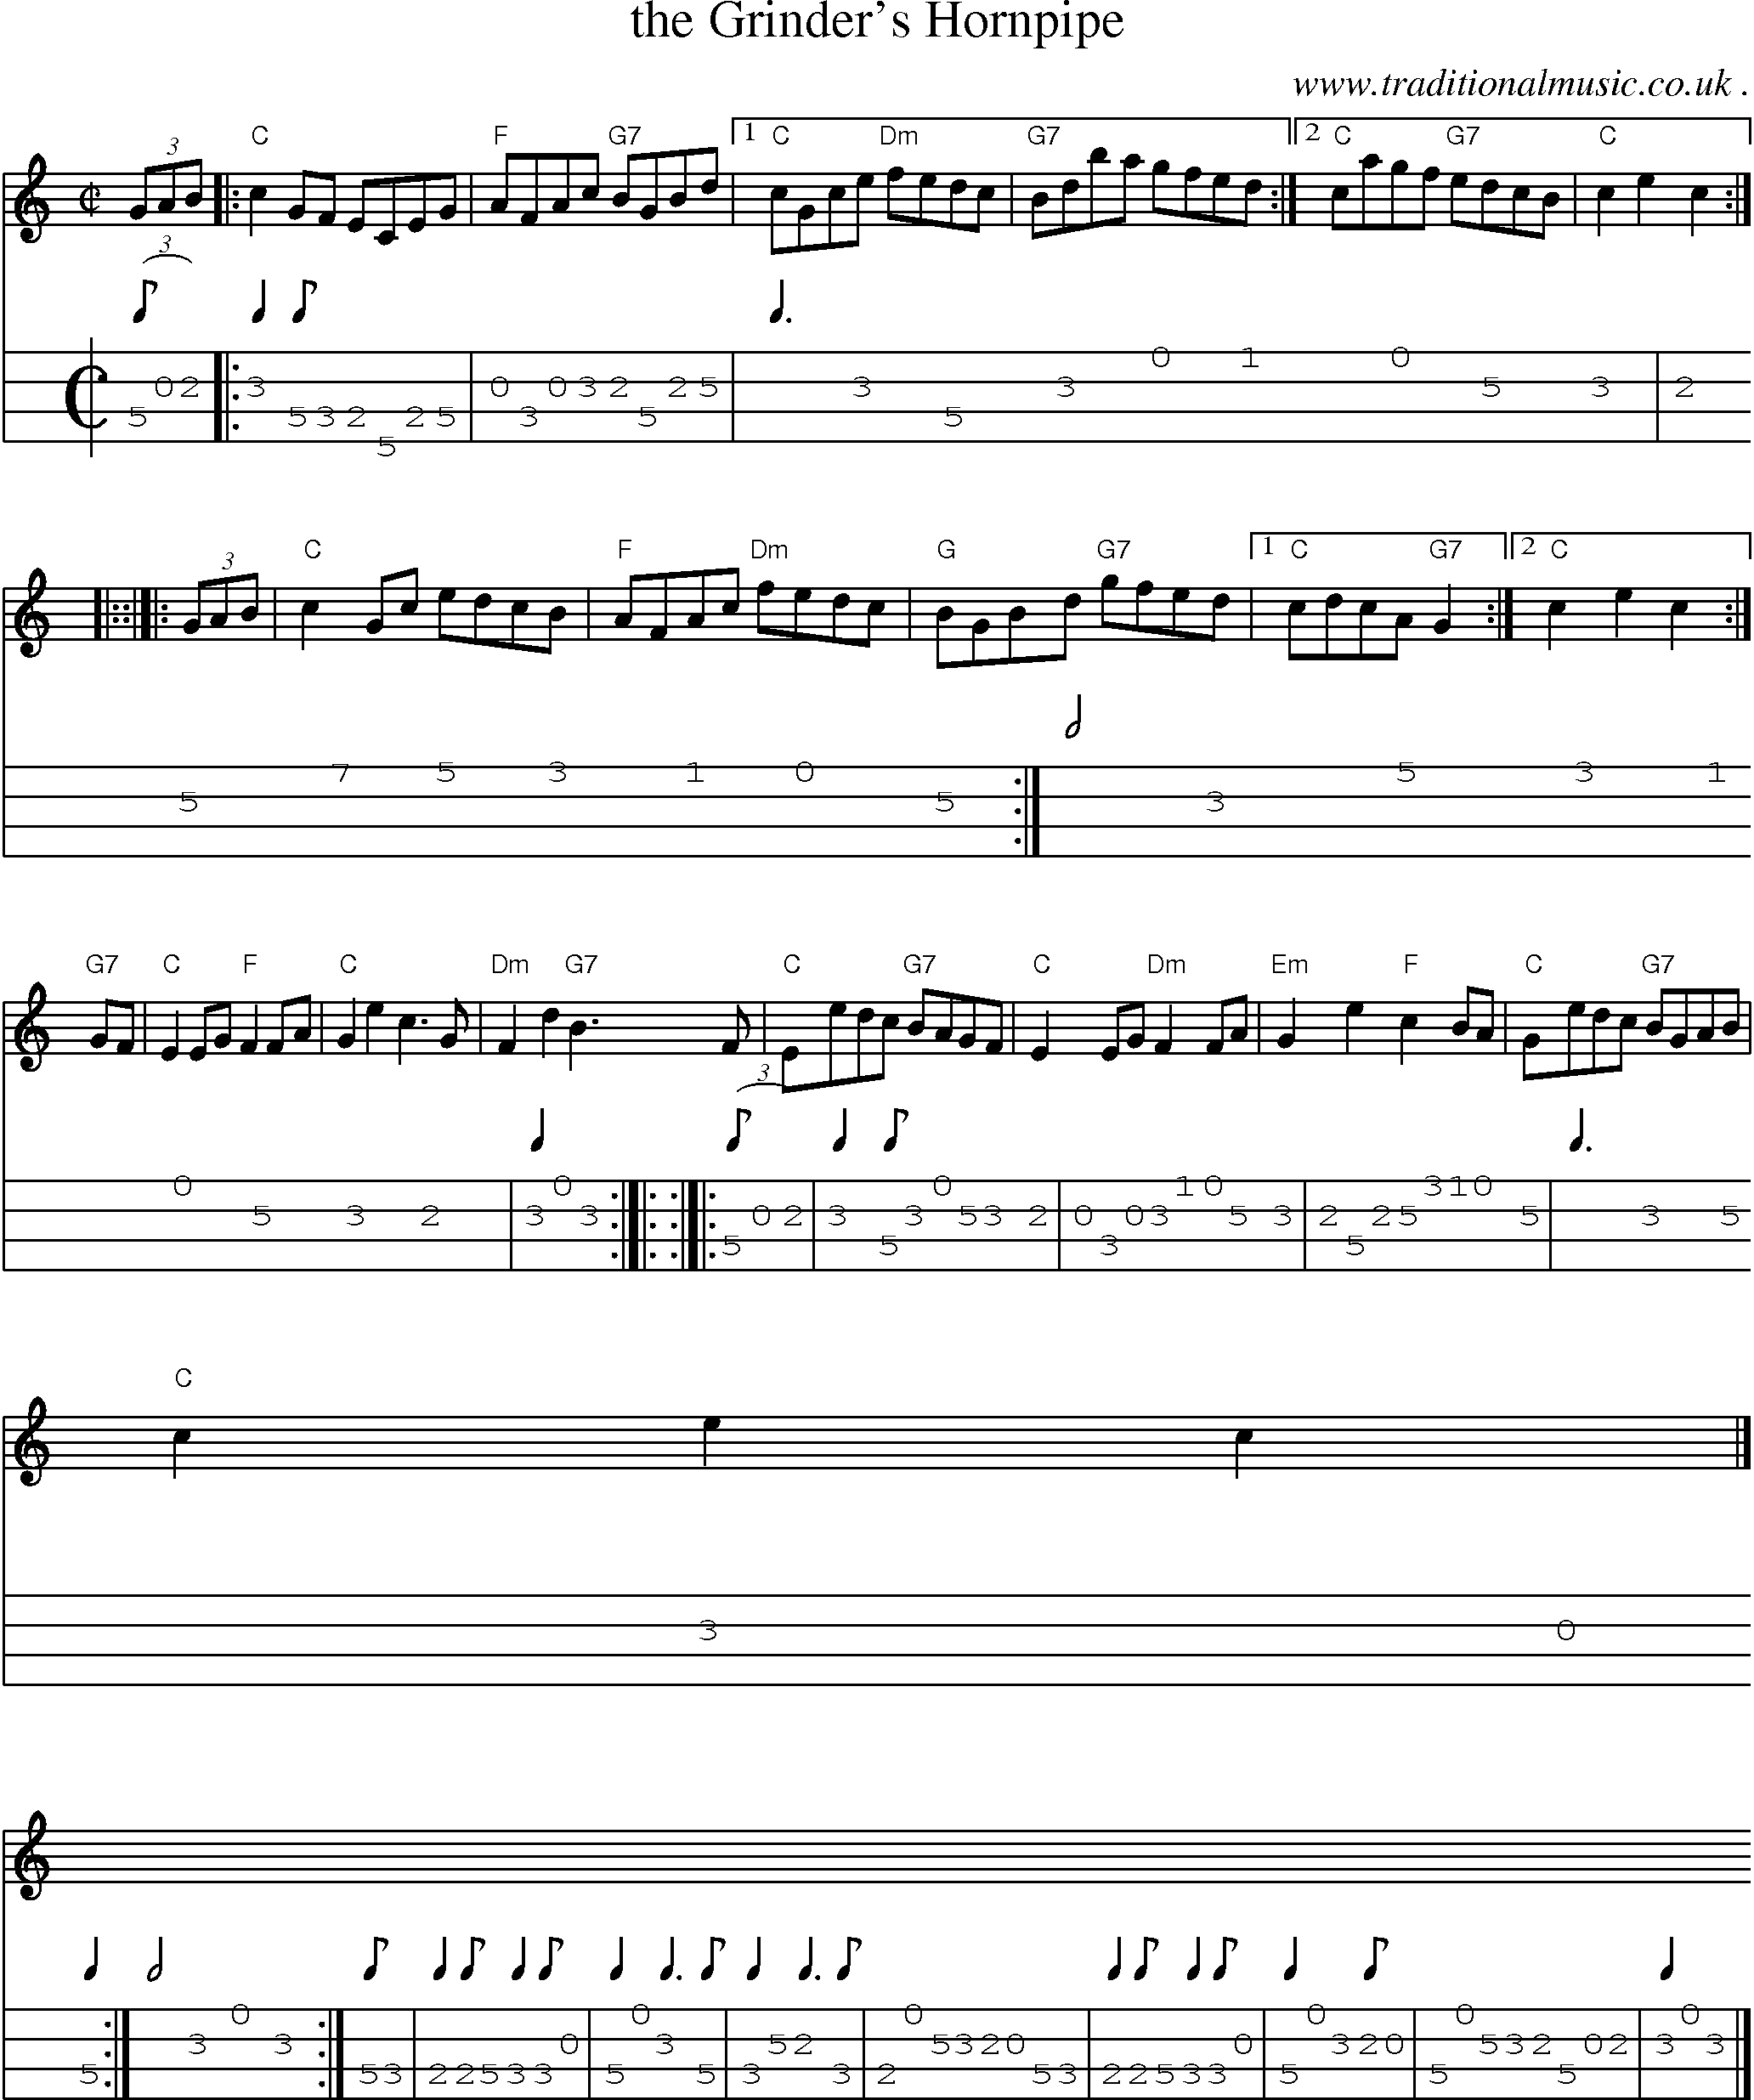 Sheet-music  score, Chords and Mandolin Tabs for The Grinders Hornpipe